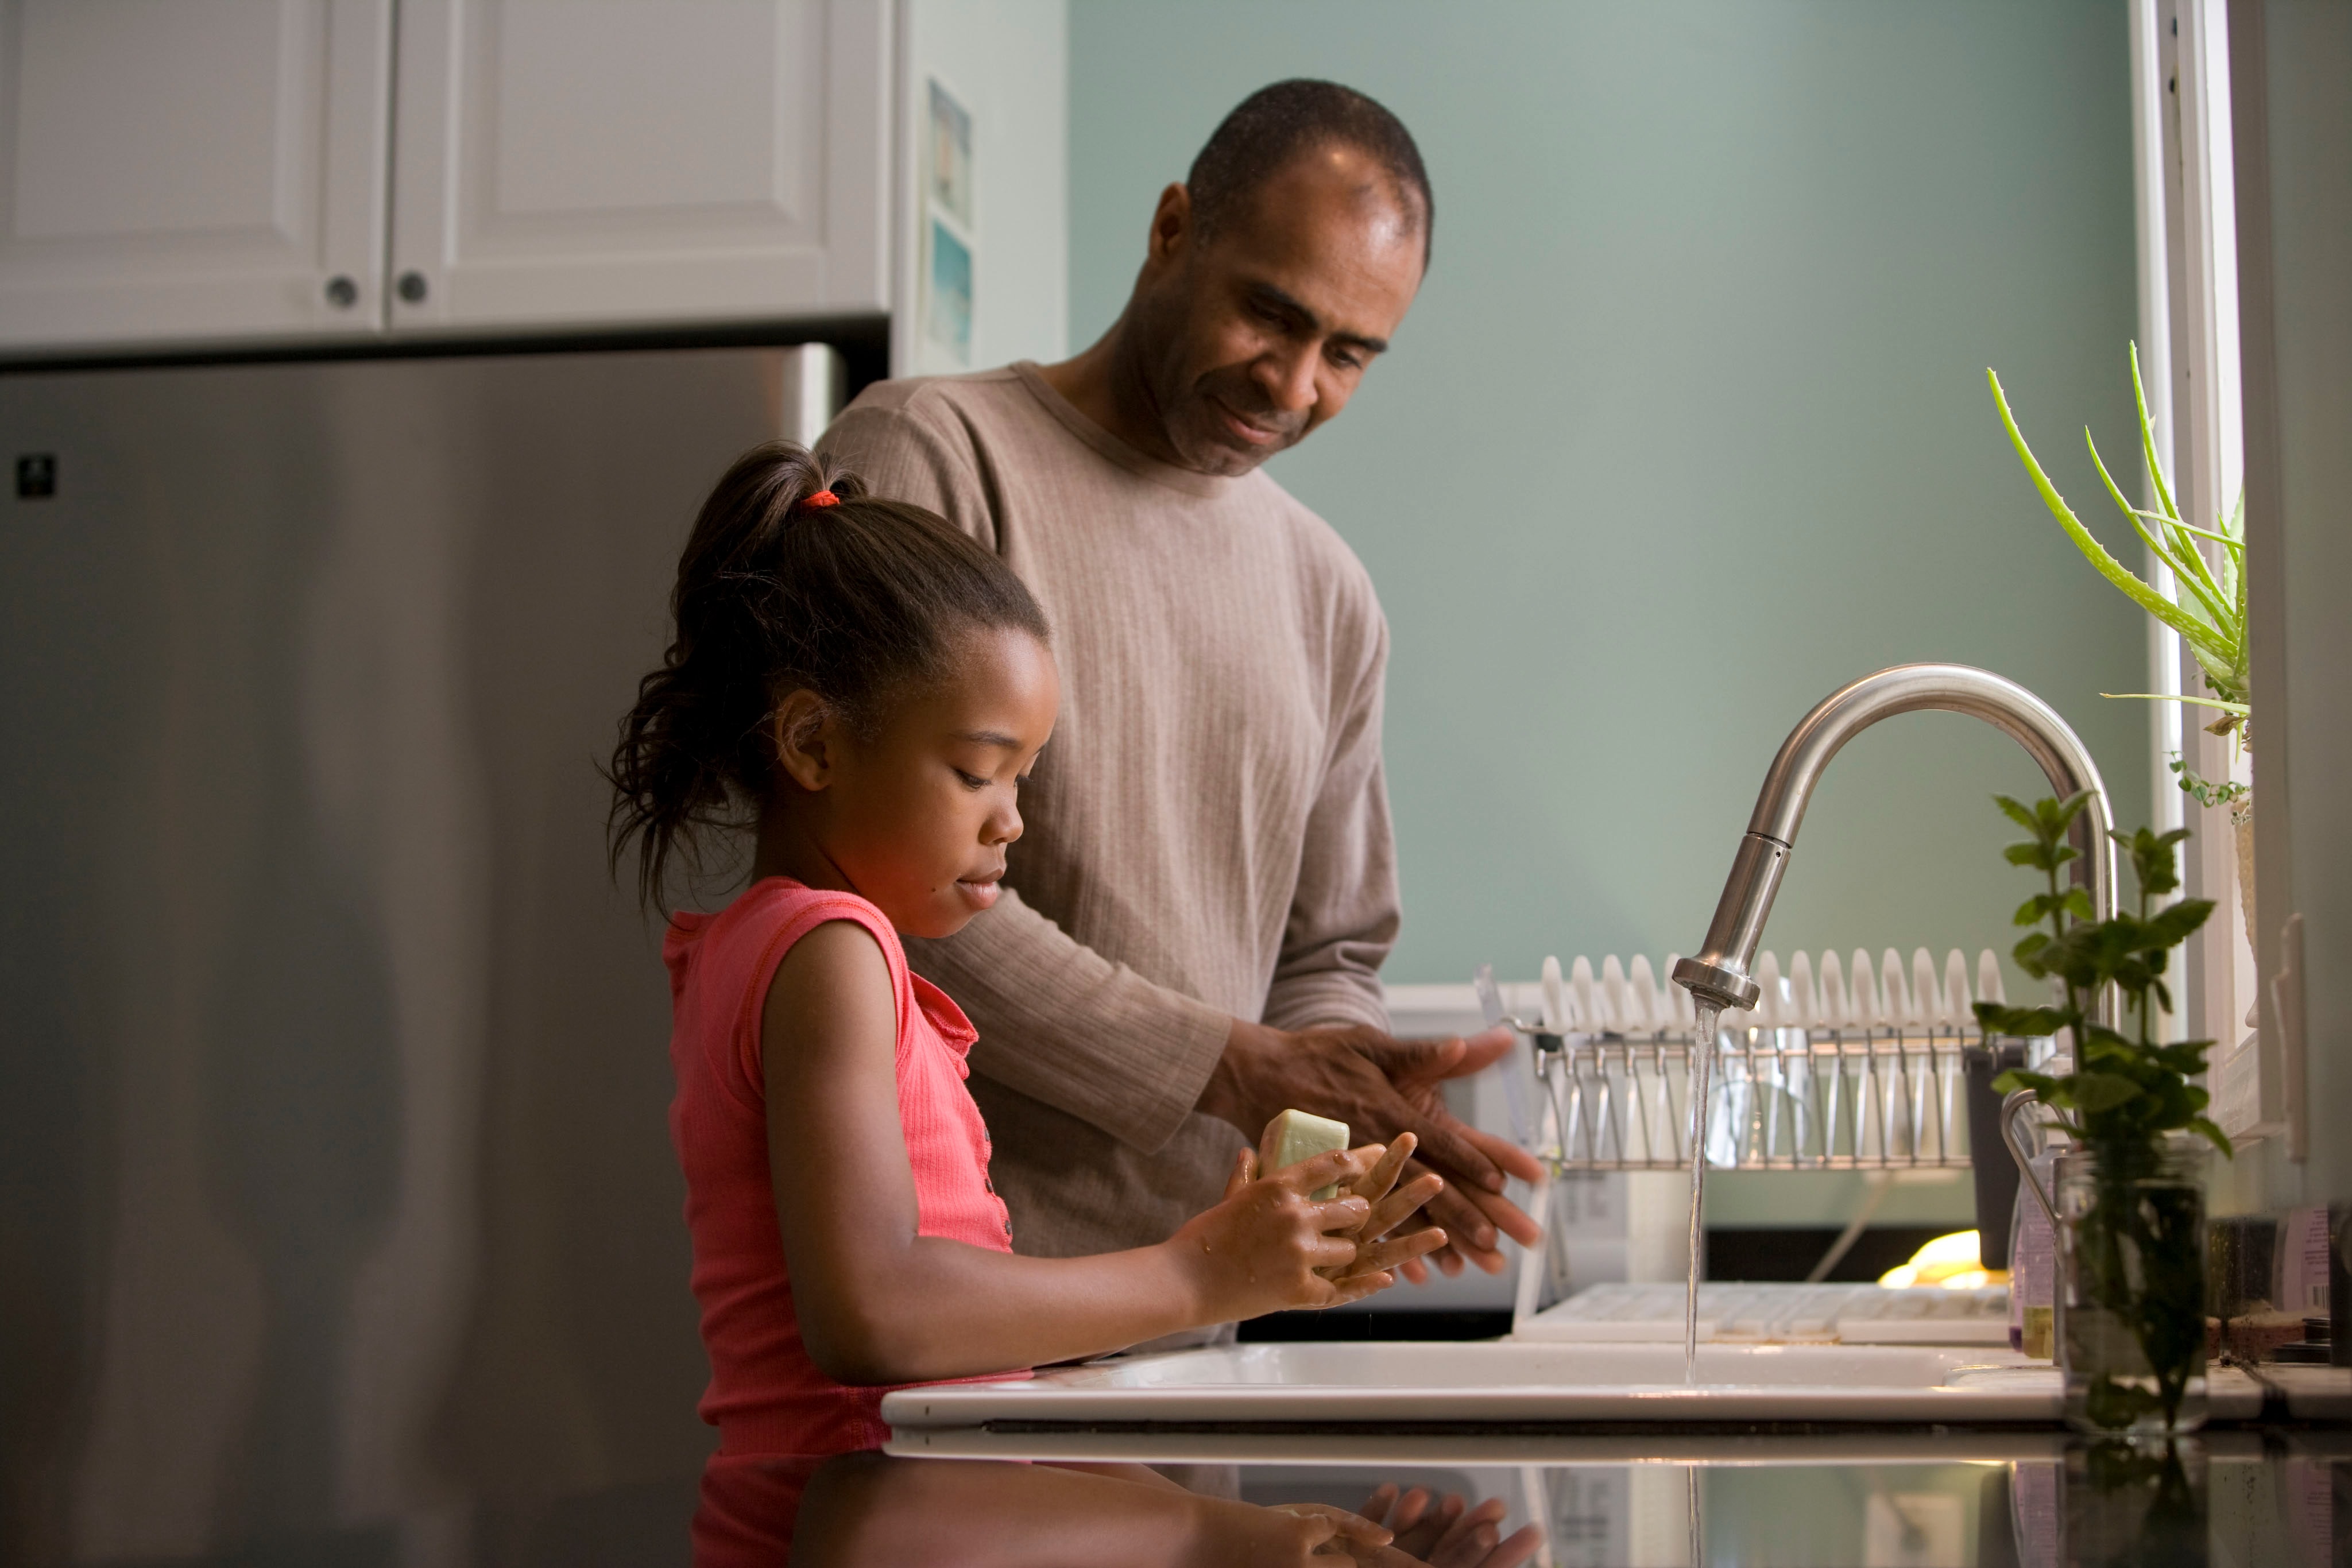 father and daughter standing over a kitchen sink washing their hands with a bar of soap